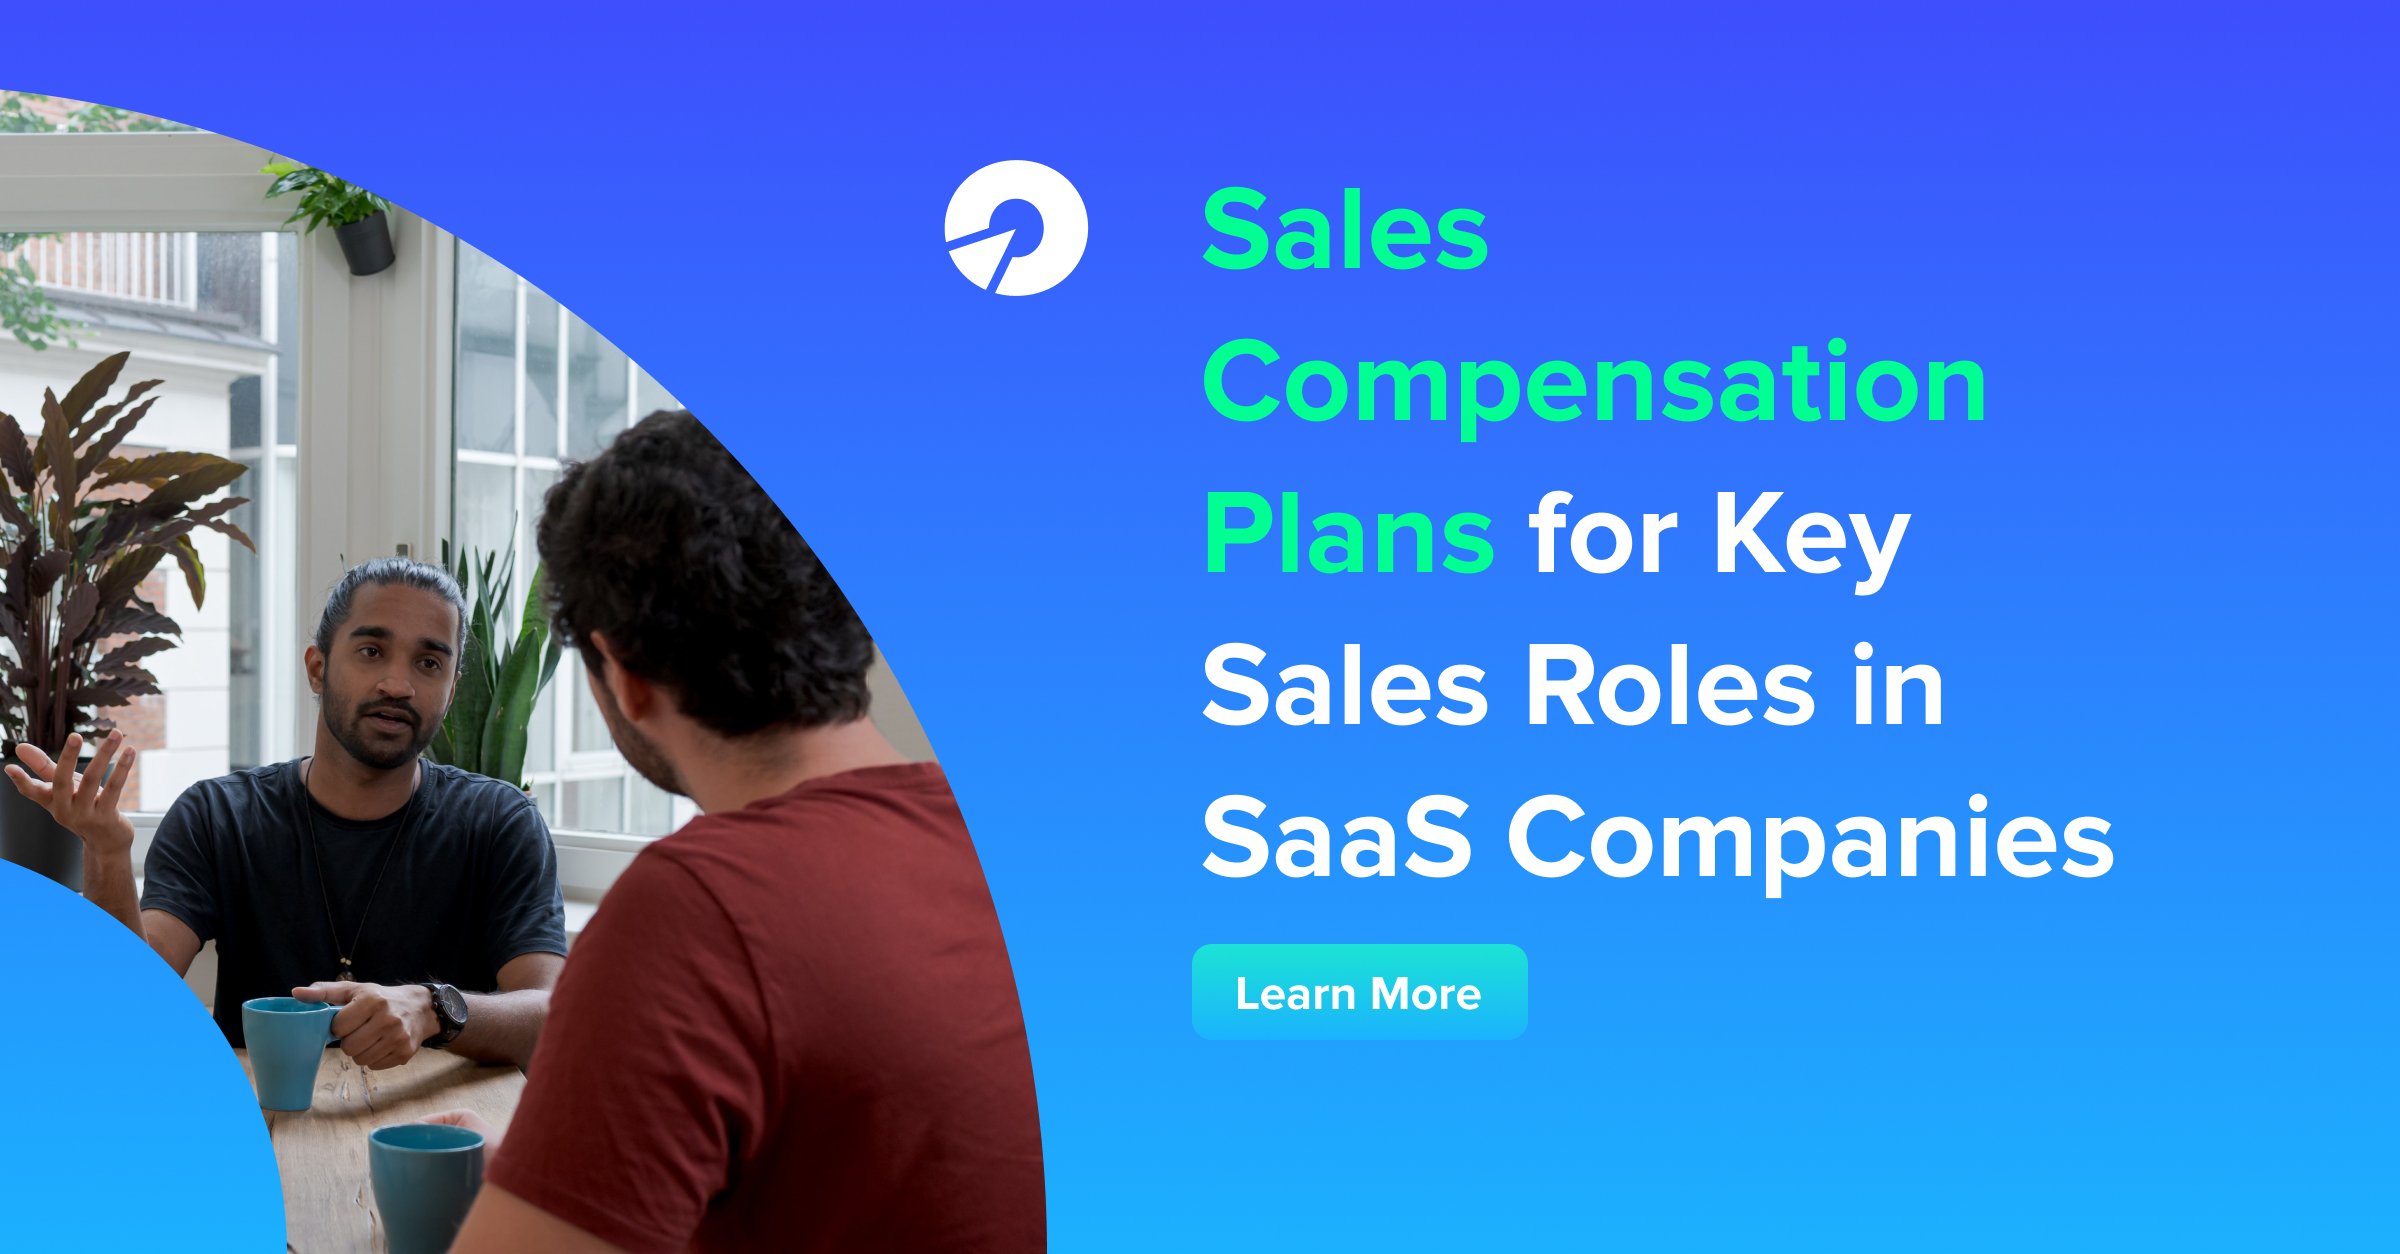 Sales Compensation Plans for Key Sales Roles in SaaS Companies